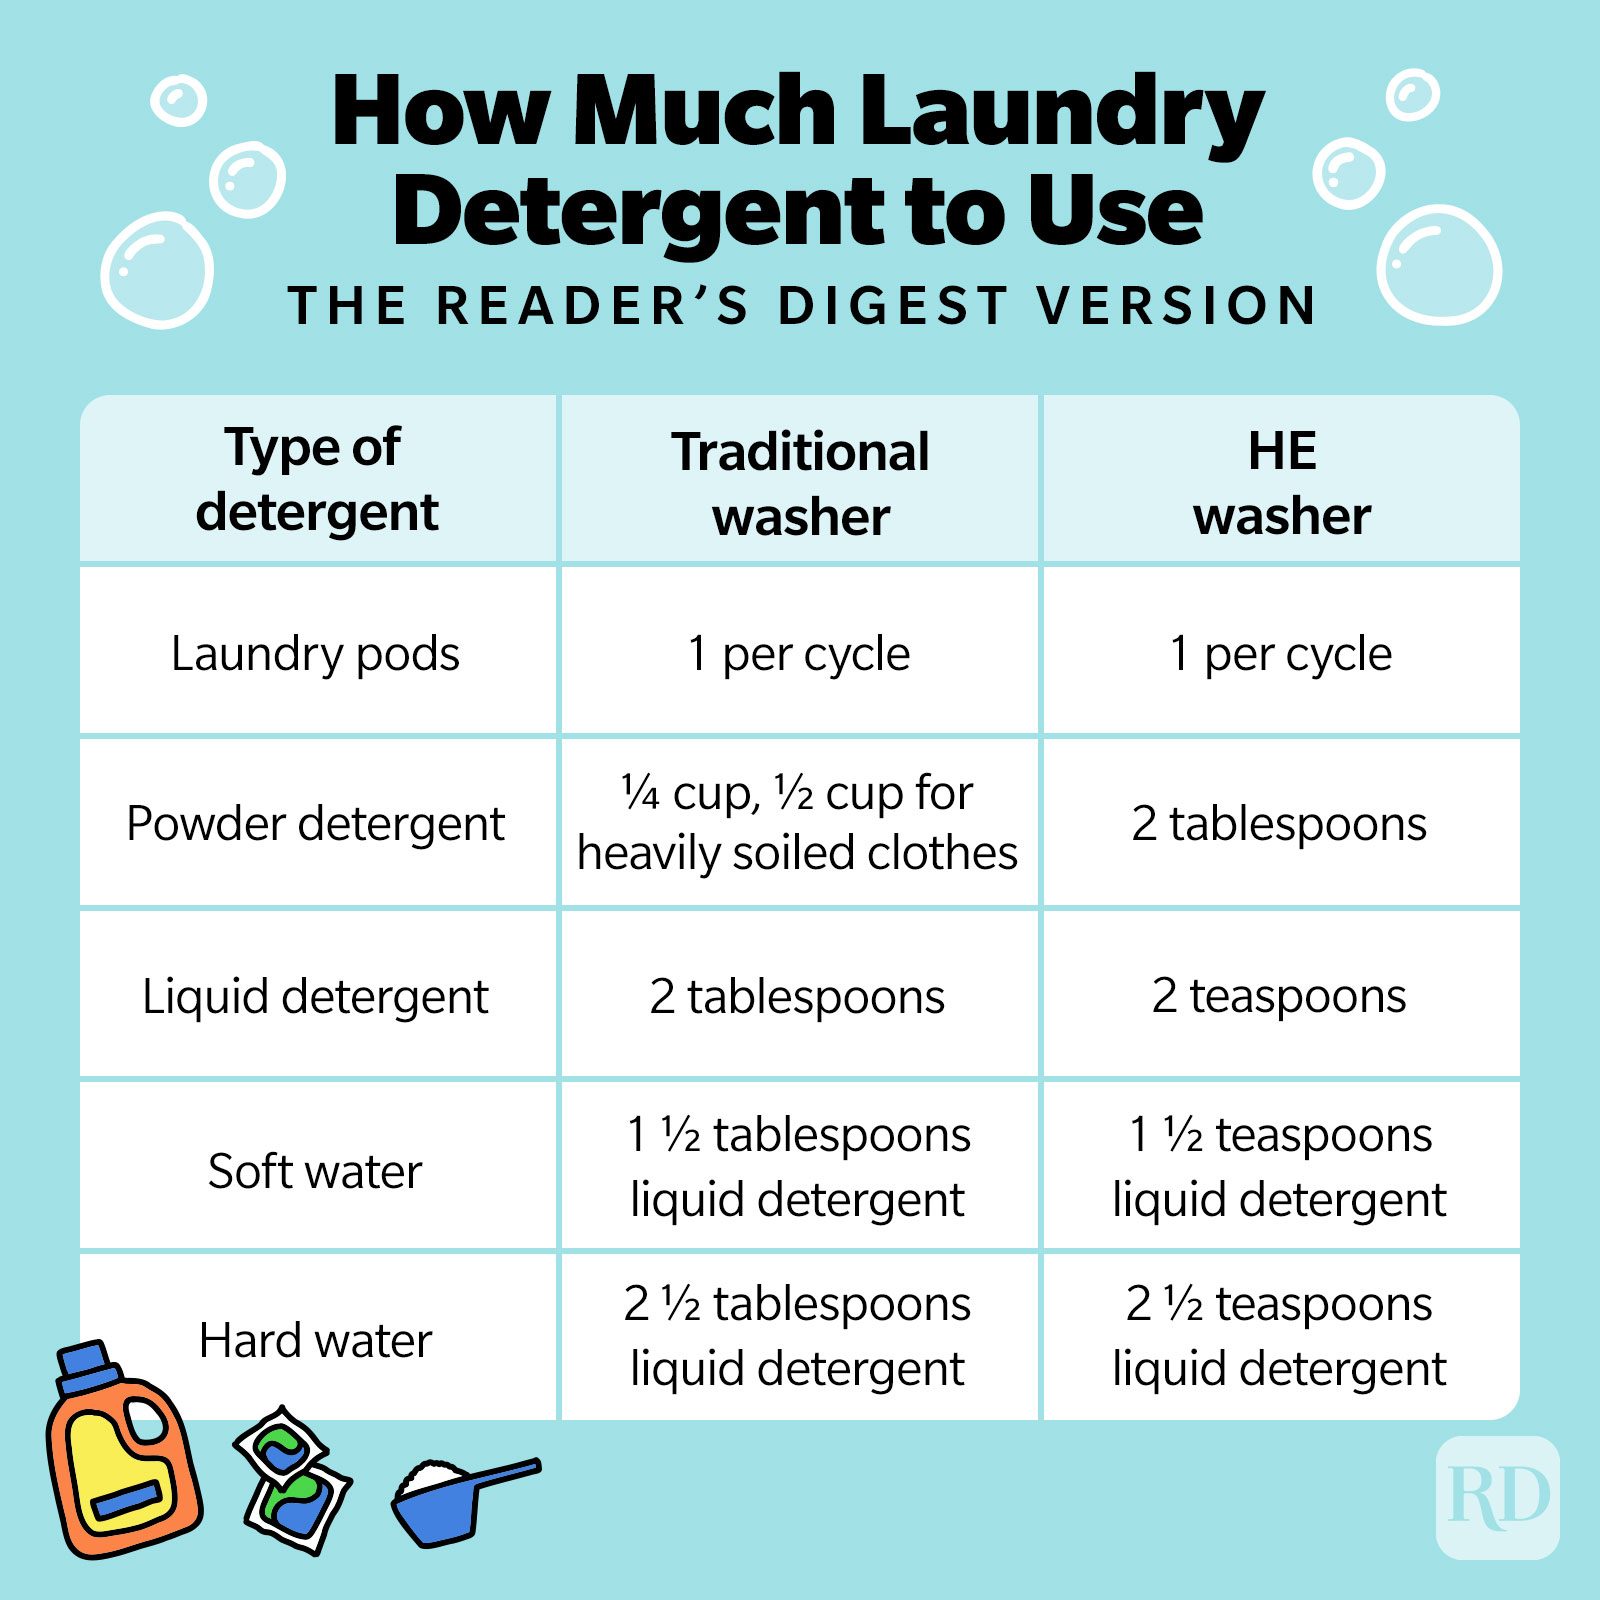 How Much Laundry Detergent To Use Infographic V2